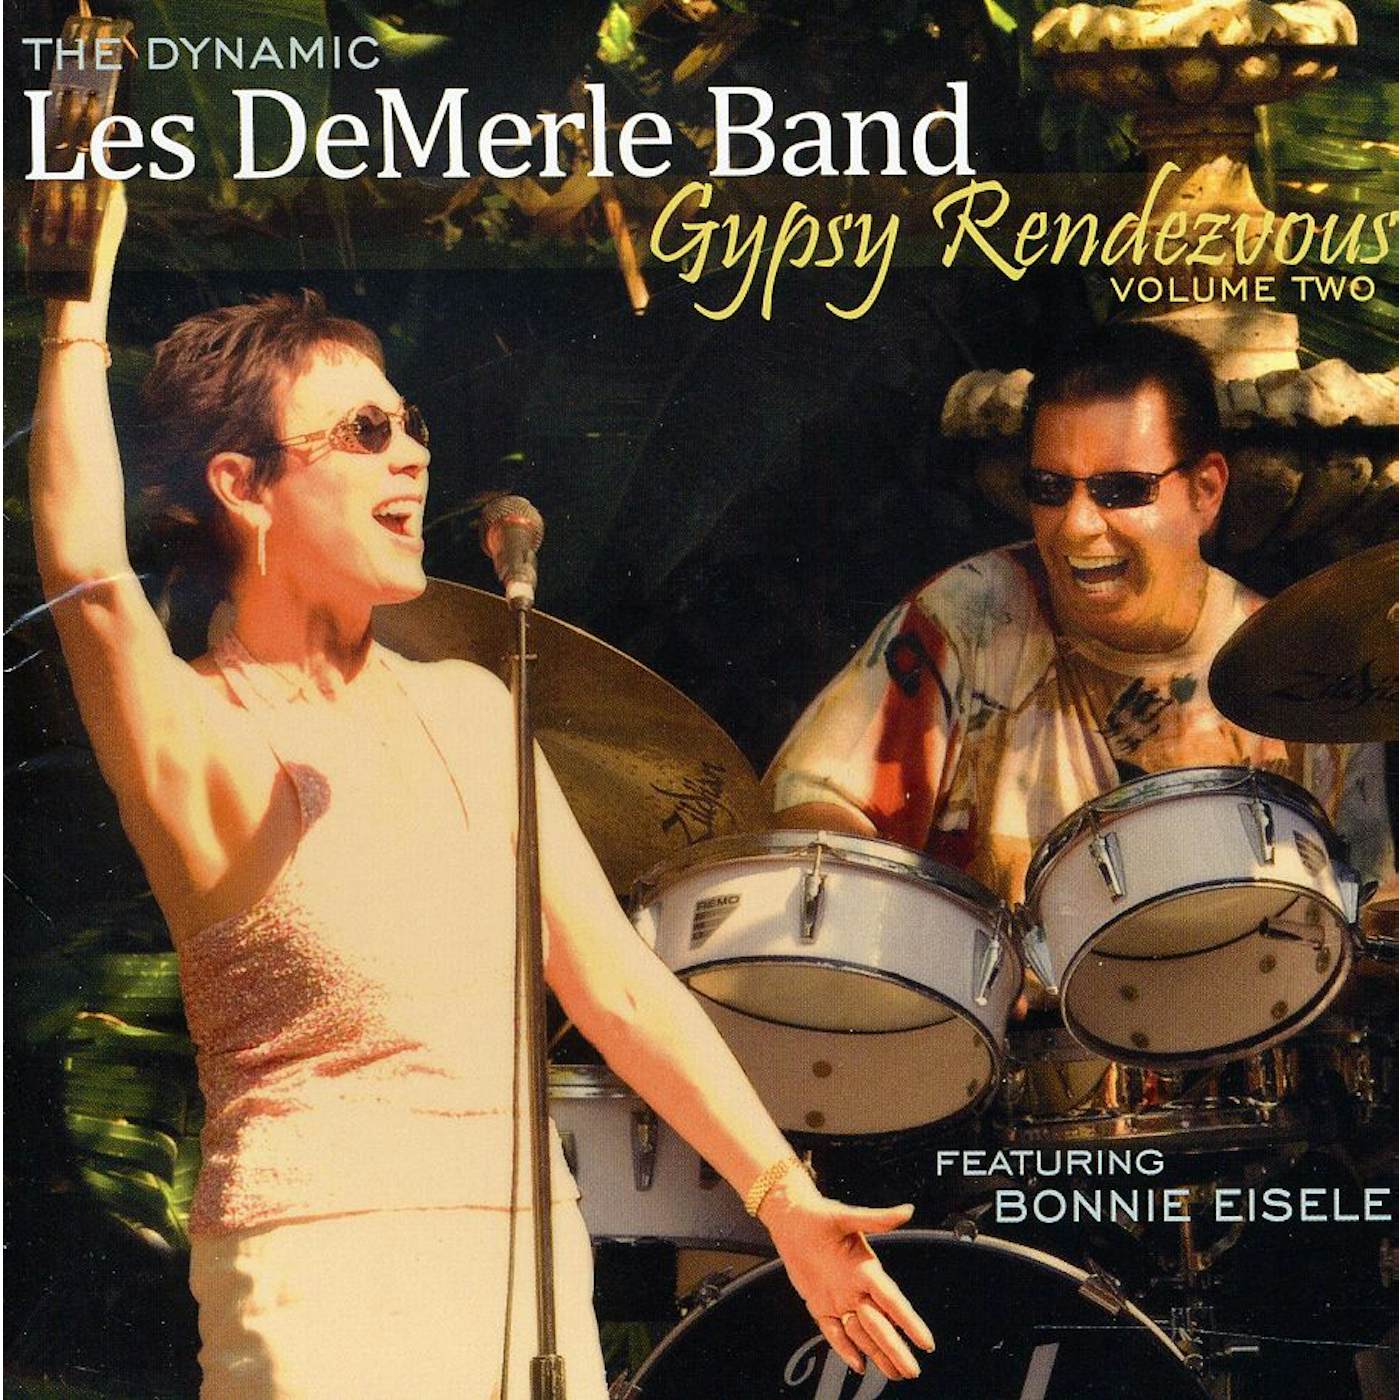 Les DeMerle GYPSY RENDEZVOUS 2 CD